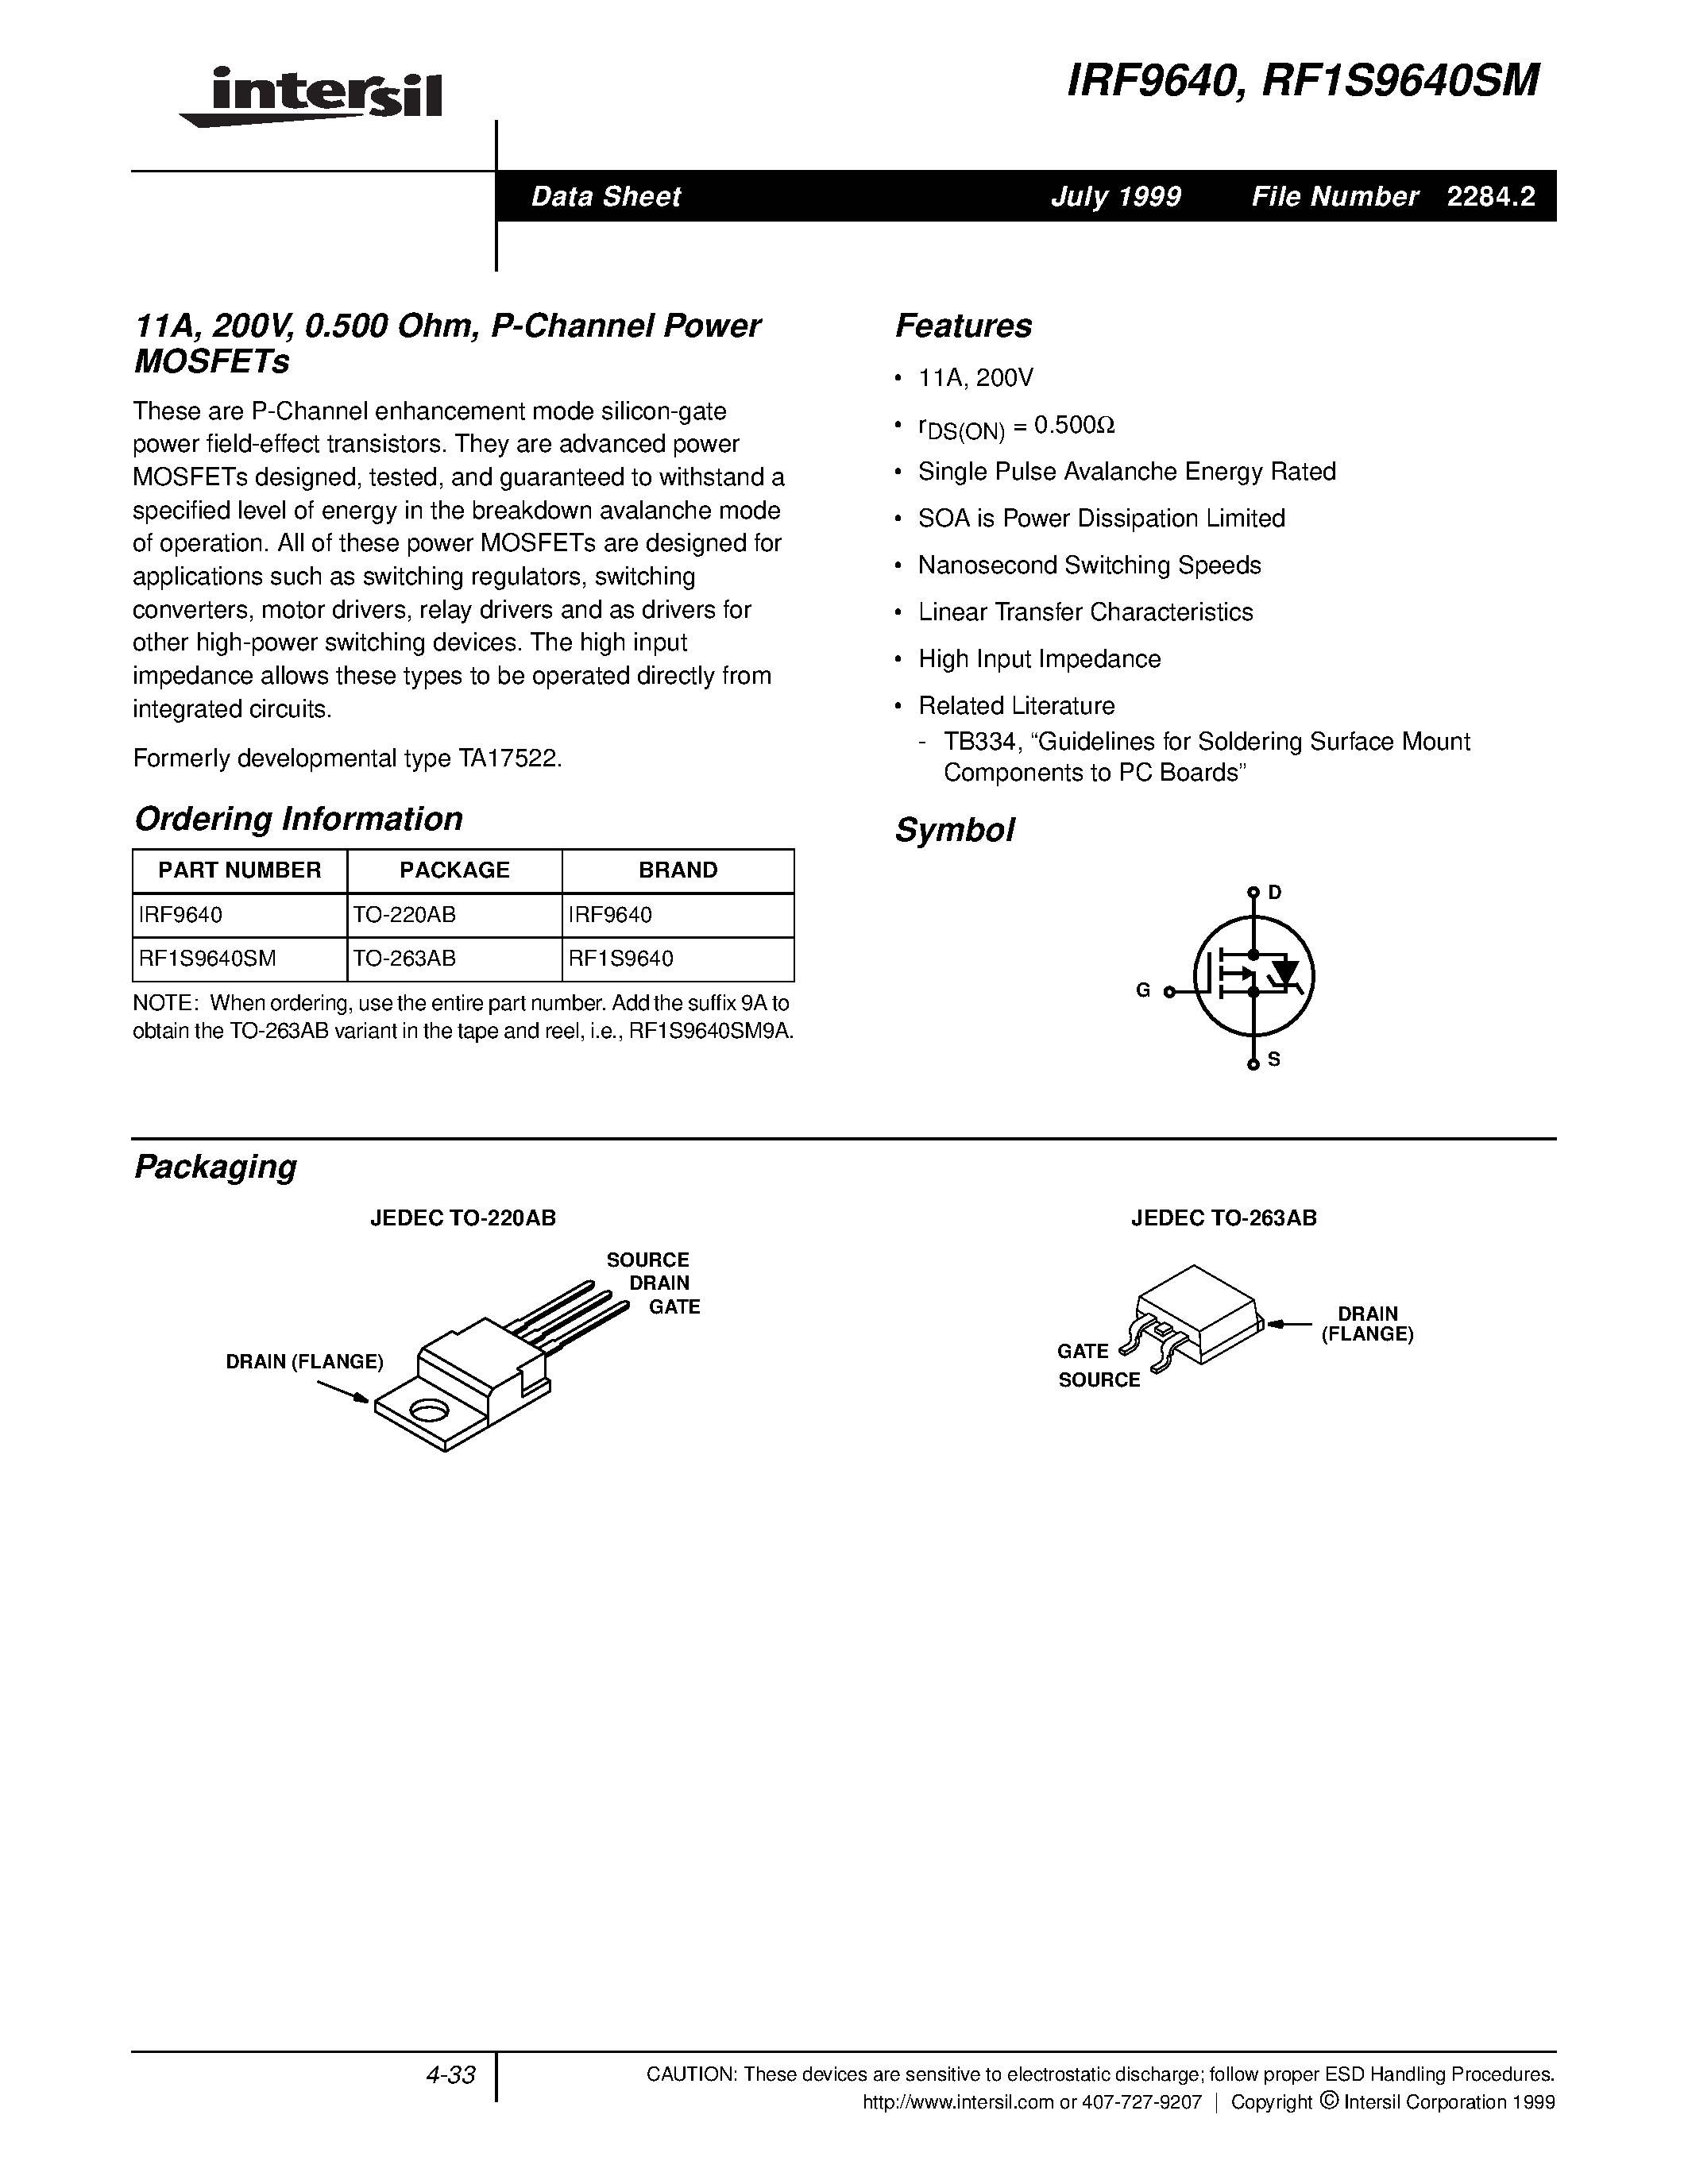 Datasheet IRF9640 - 11A/ 200V/ 0.500 Ohm/ P-Channel Power MOSFETs page 1